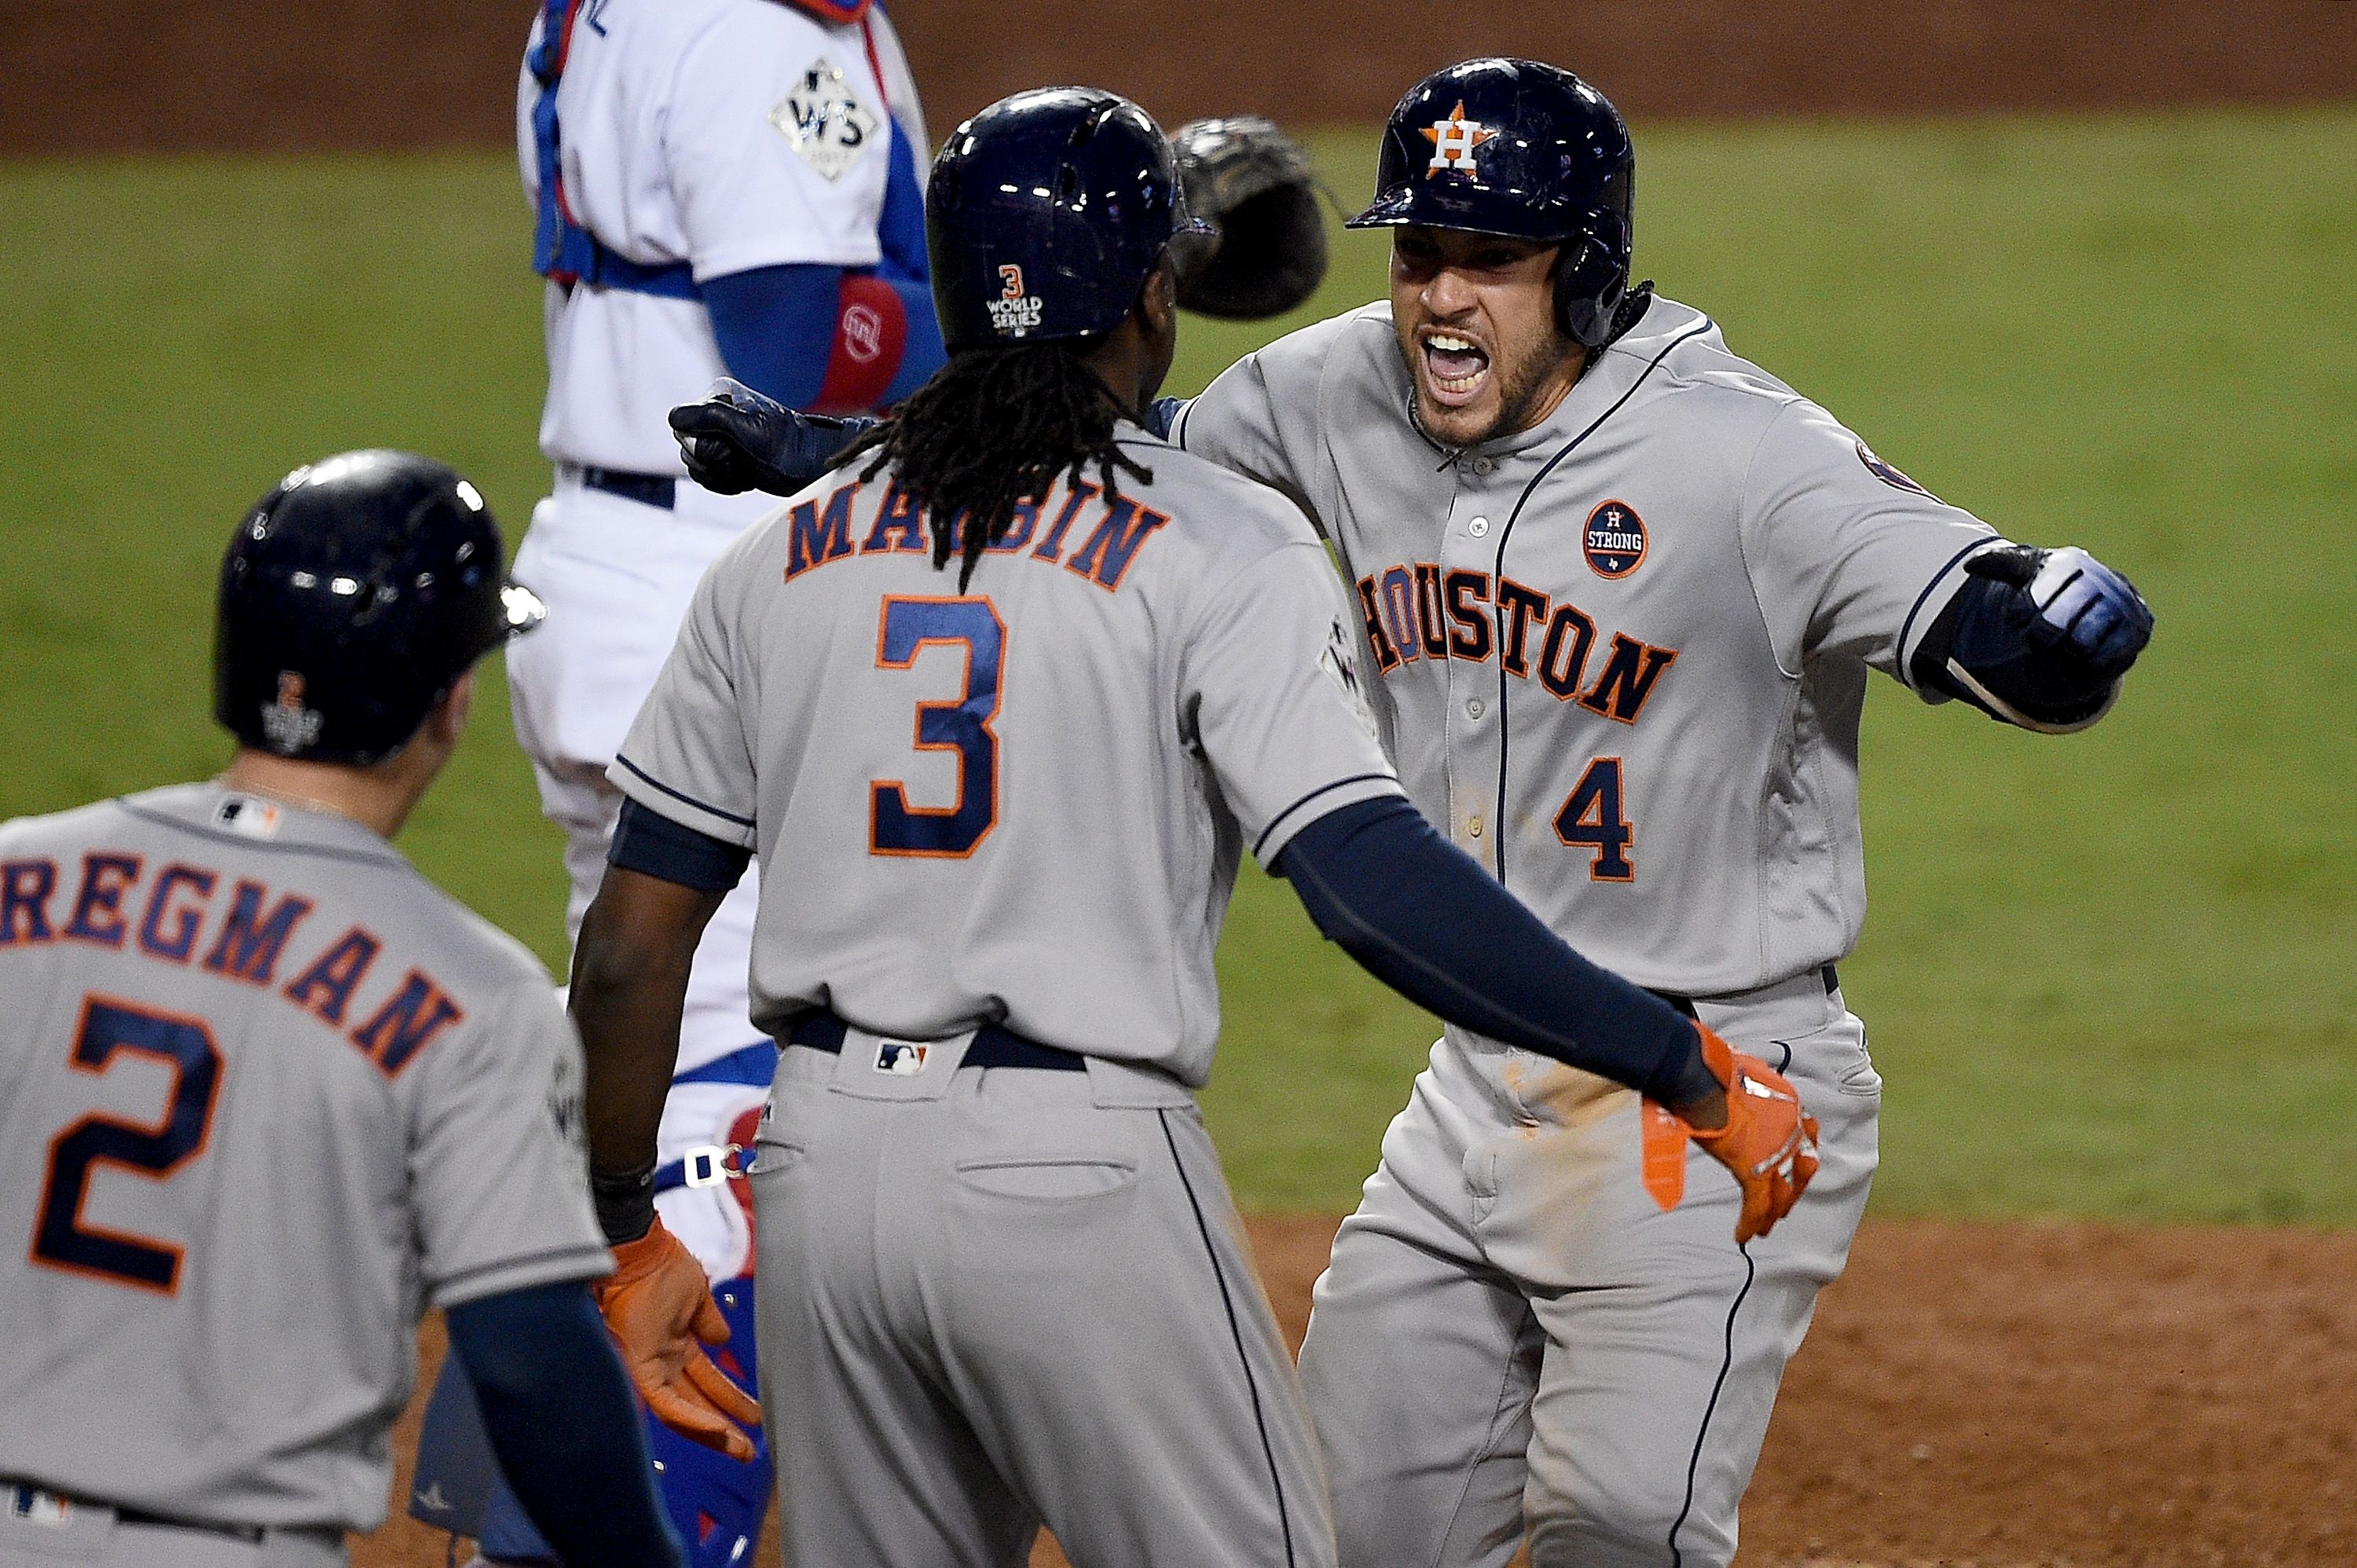 Astros win World Series in seven games over Dodgers